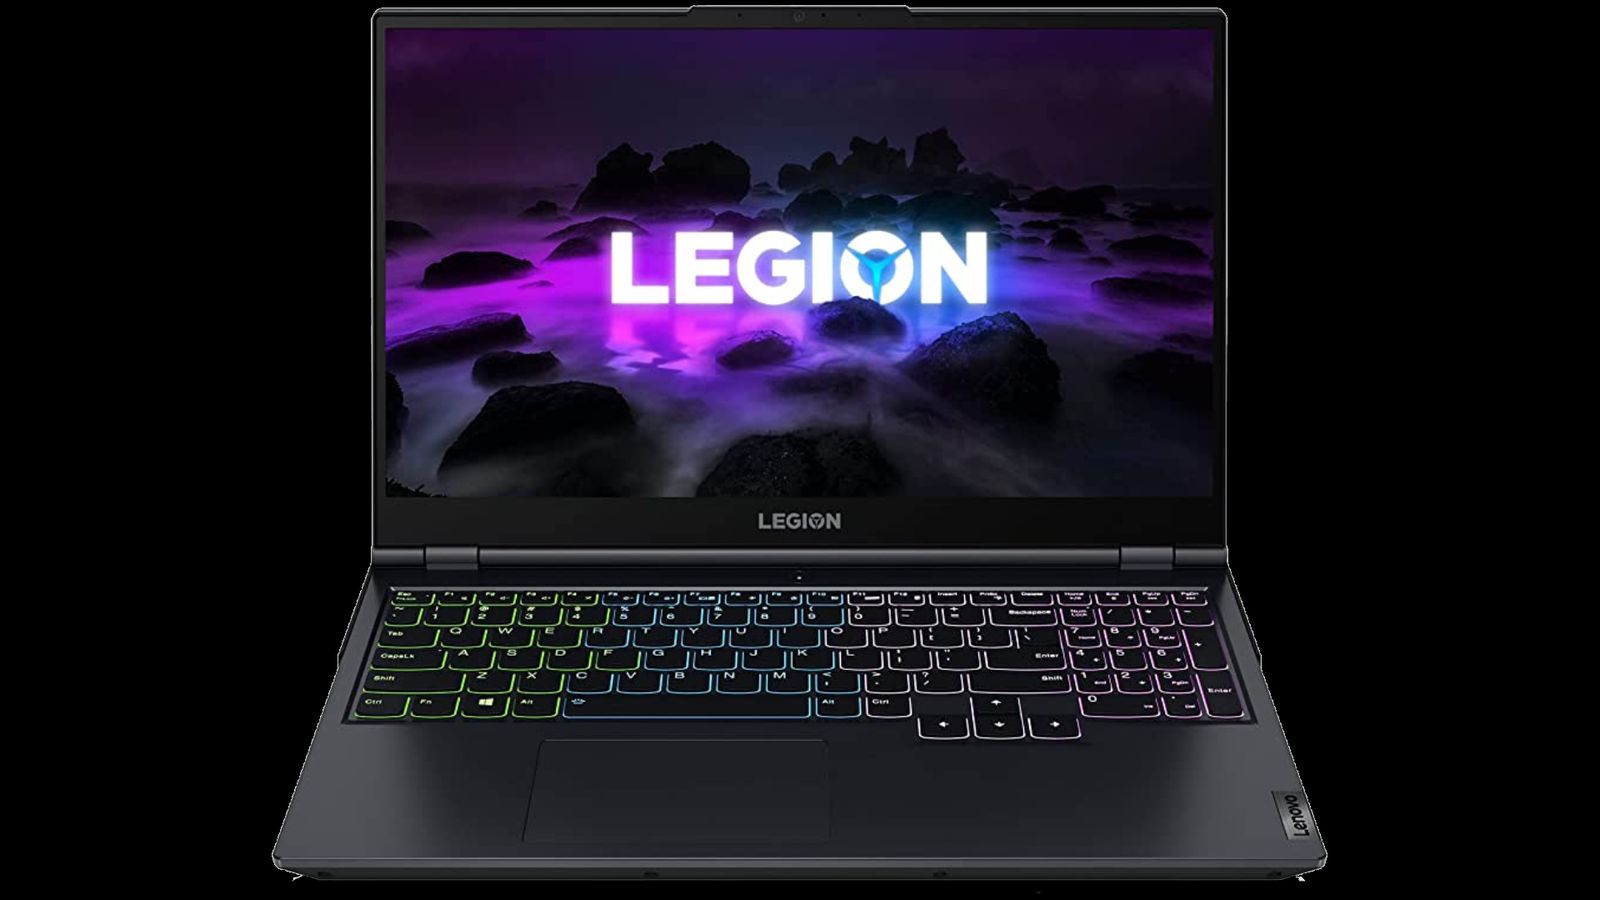 Lenovo Legion 5 product image of a black laptop with Legion branding on a purple and black background on the display.